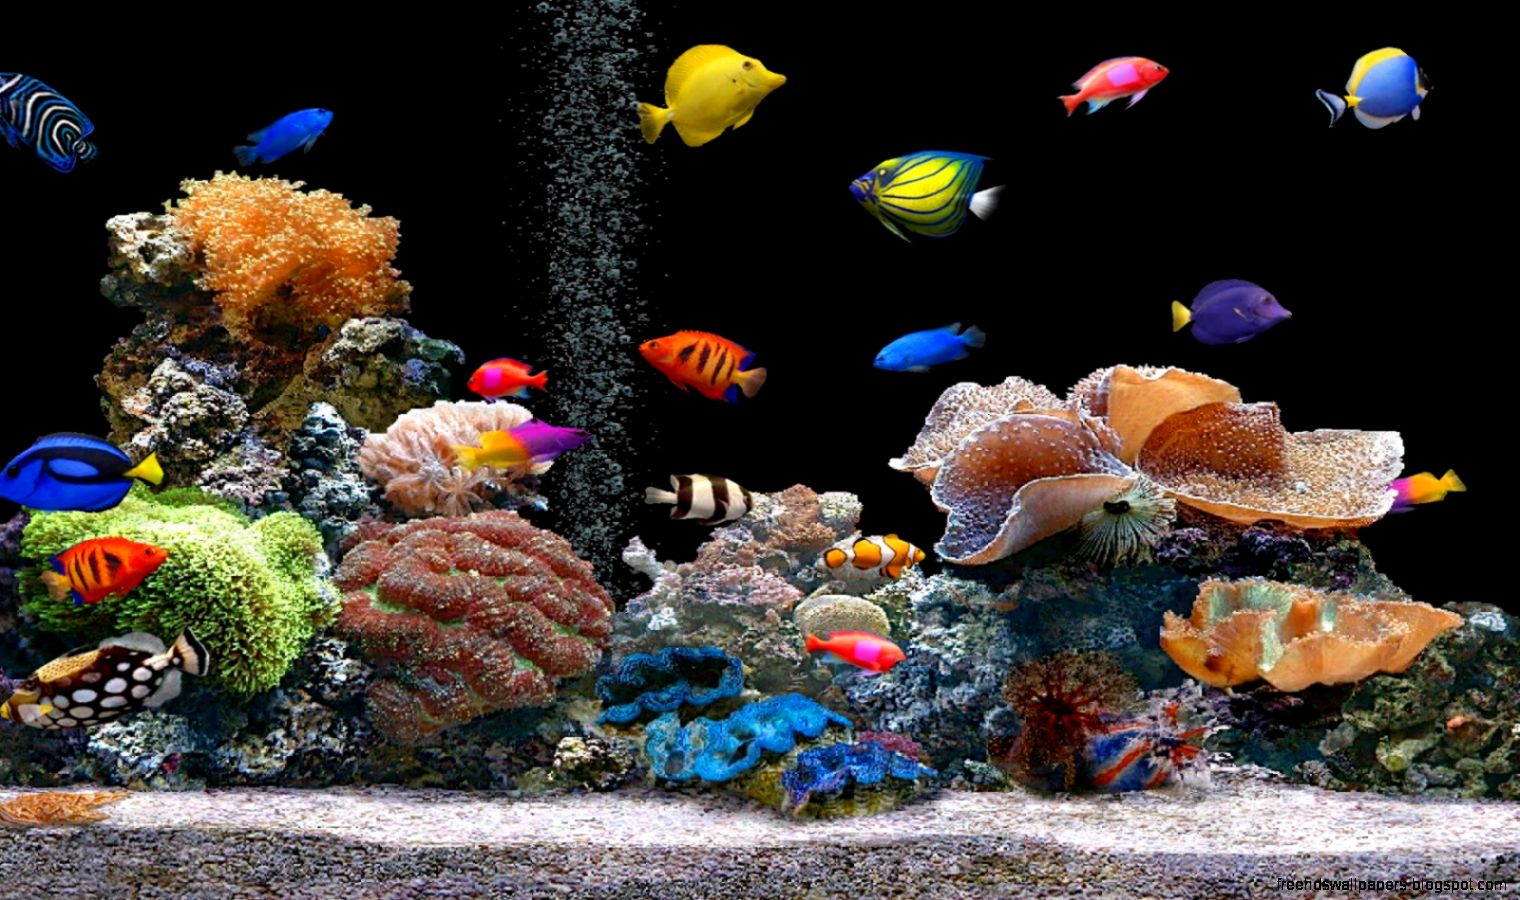 Fish Live Wallpaper Free Download | Free Hd Wallpapers